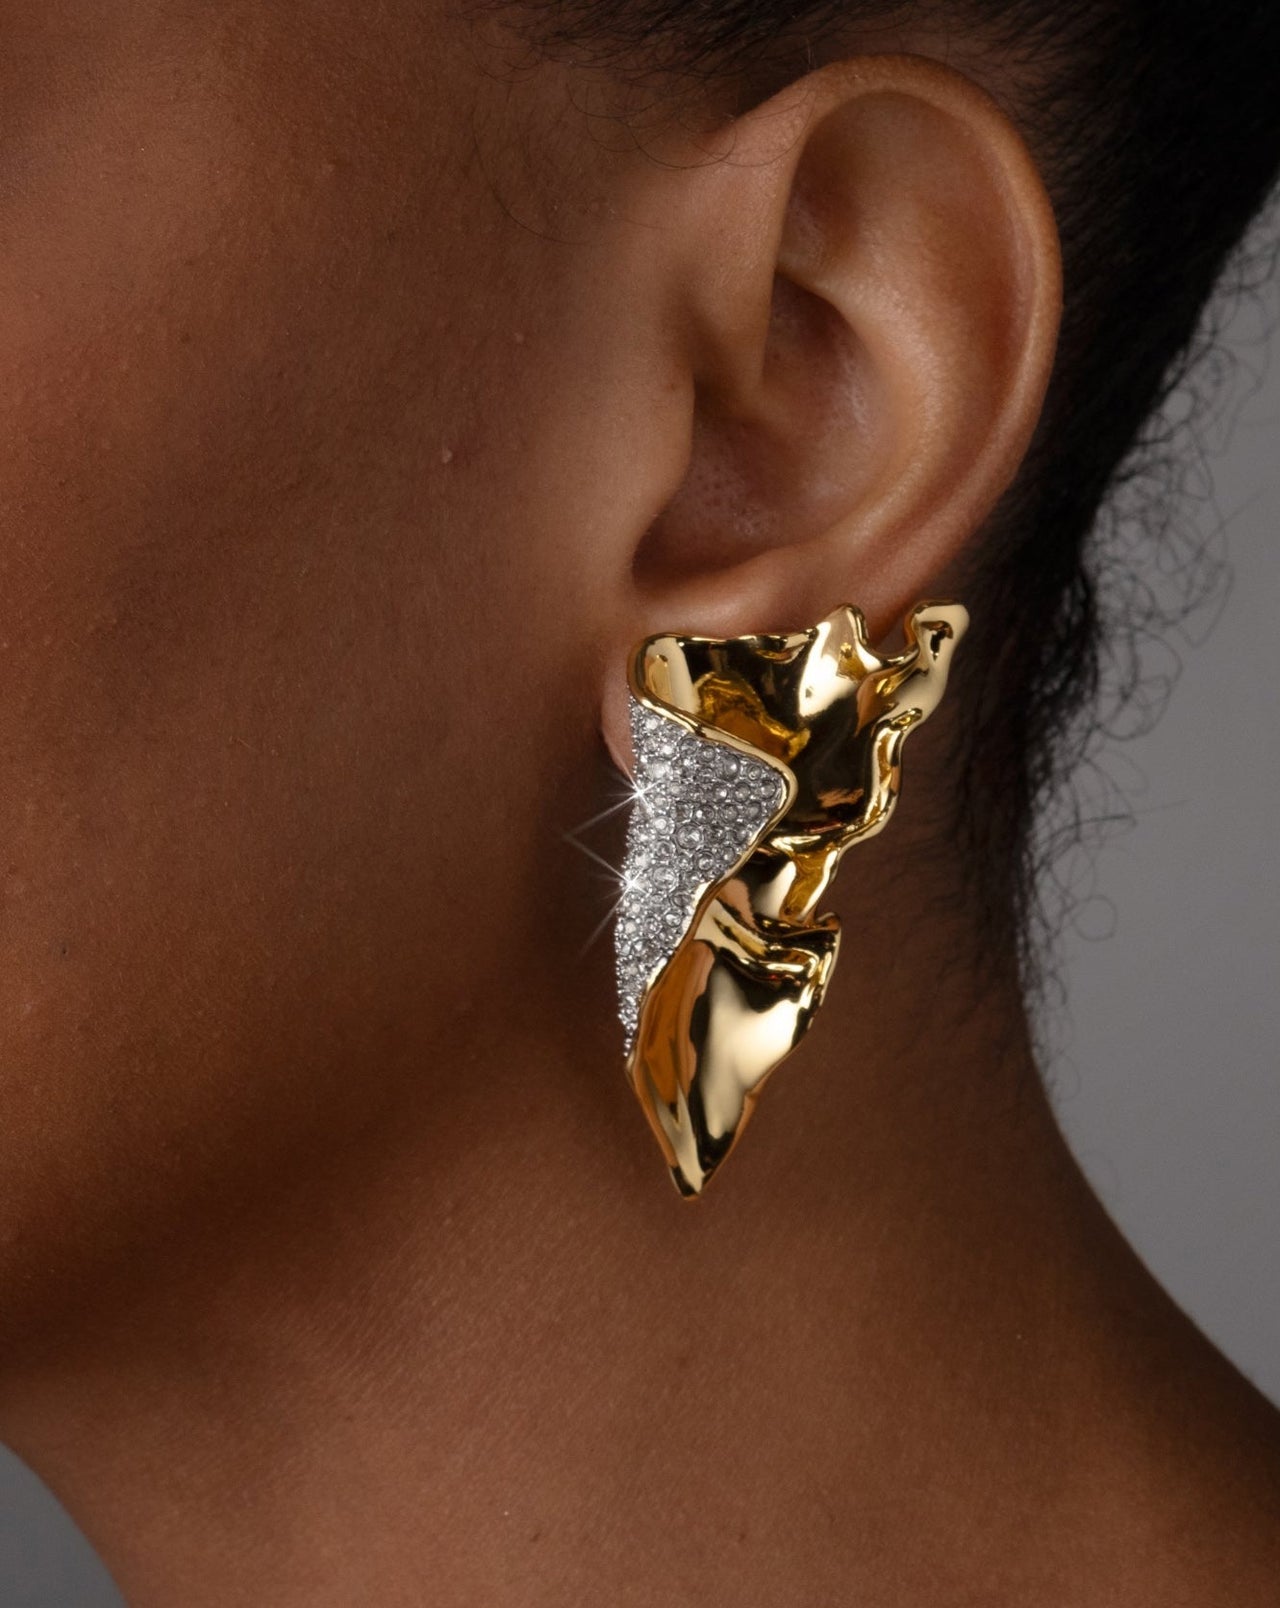 Solanales Gold Crystal Folded Earring - Photo 2